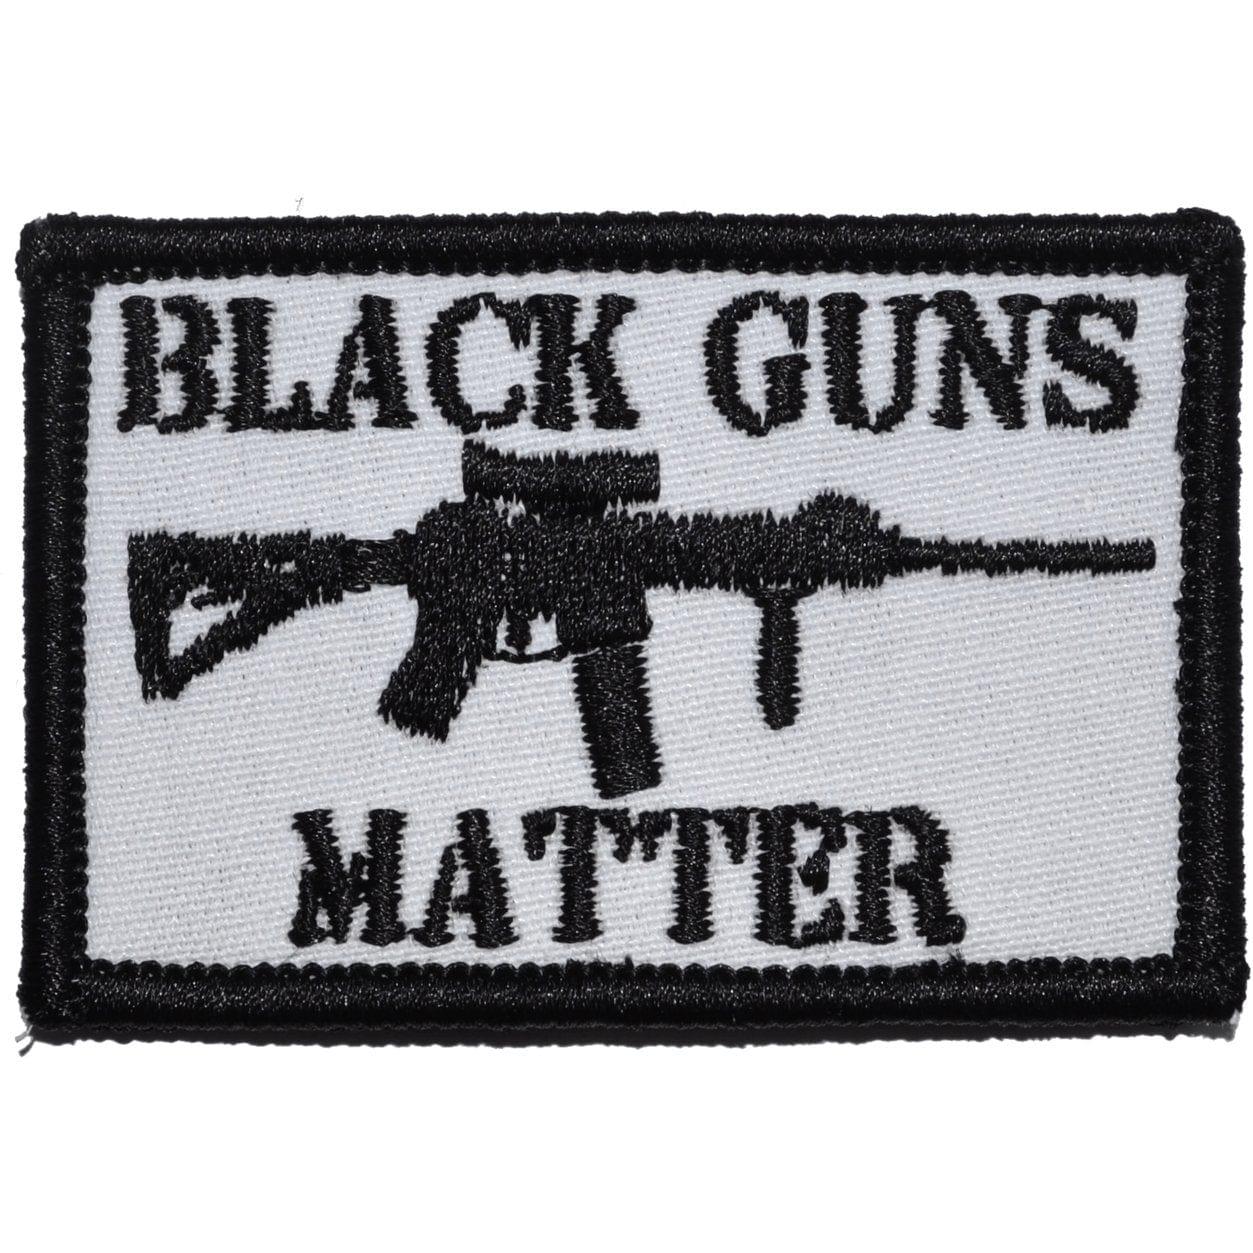 Tactical Gear Junkie Patches Full Color Black Guns Matter - 2x3 Patch